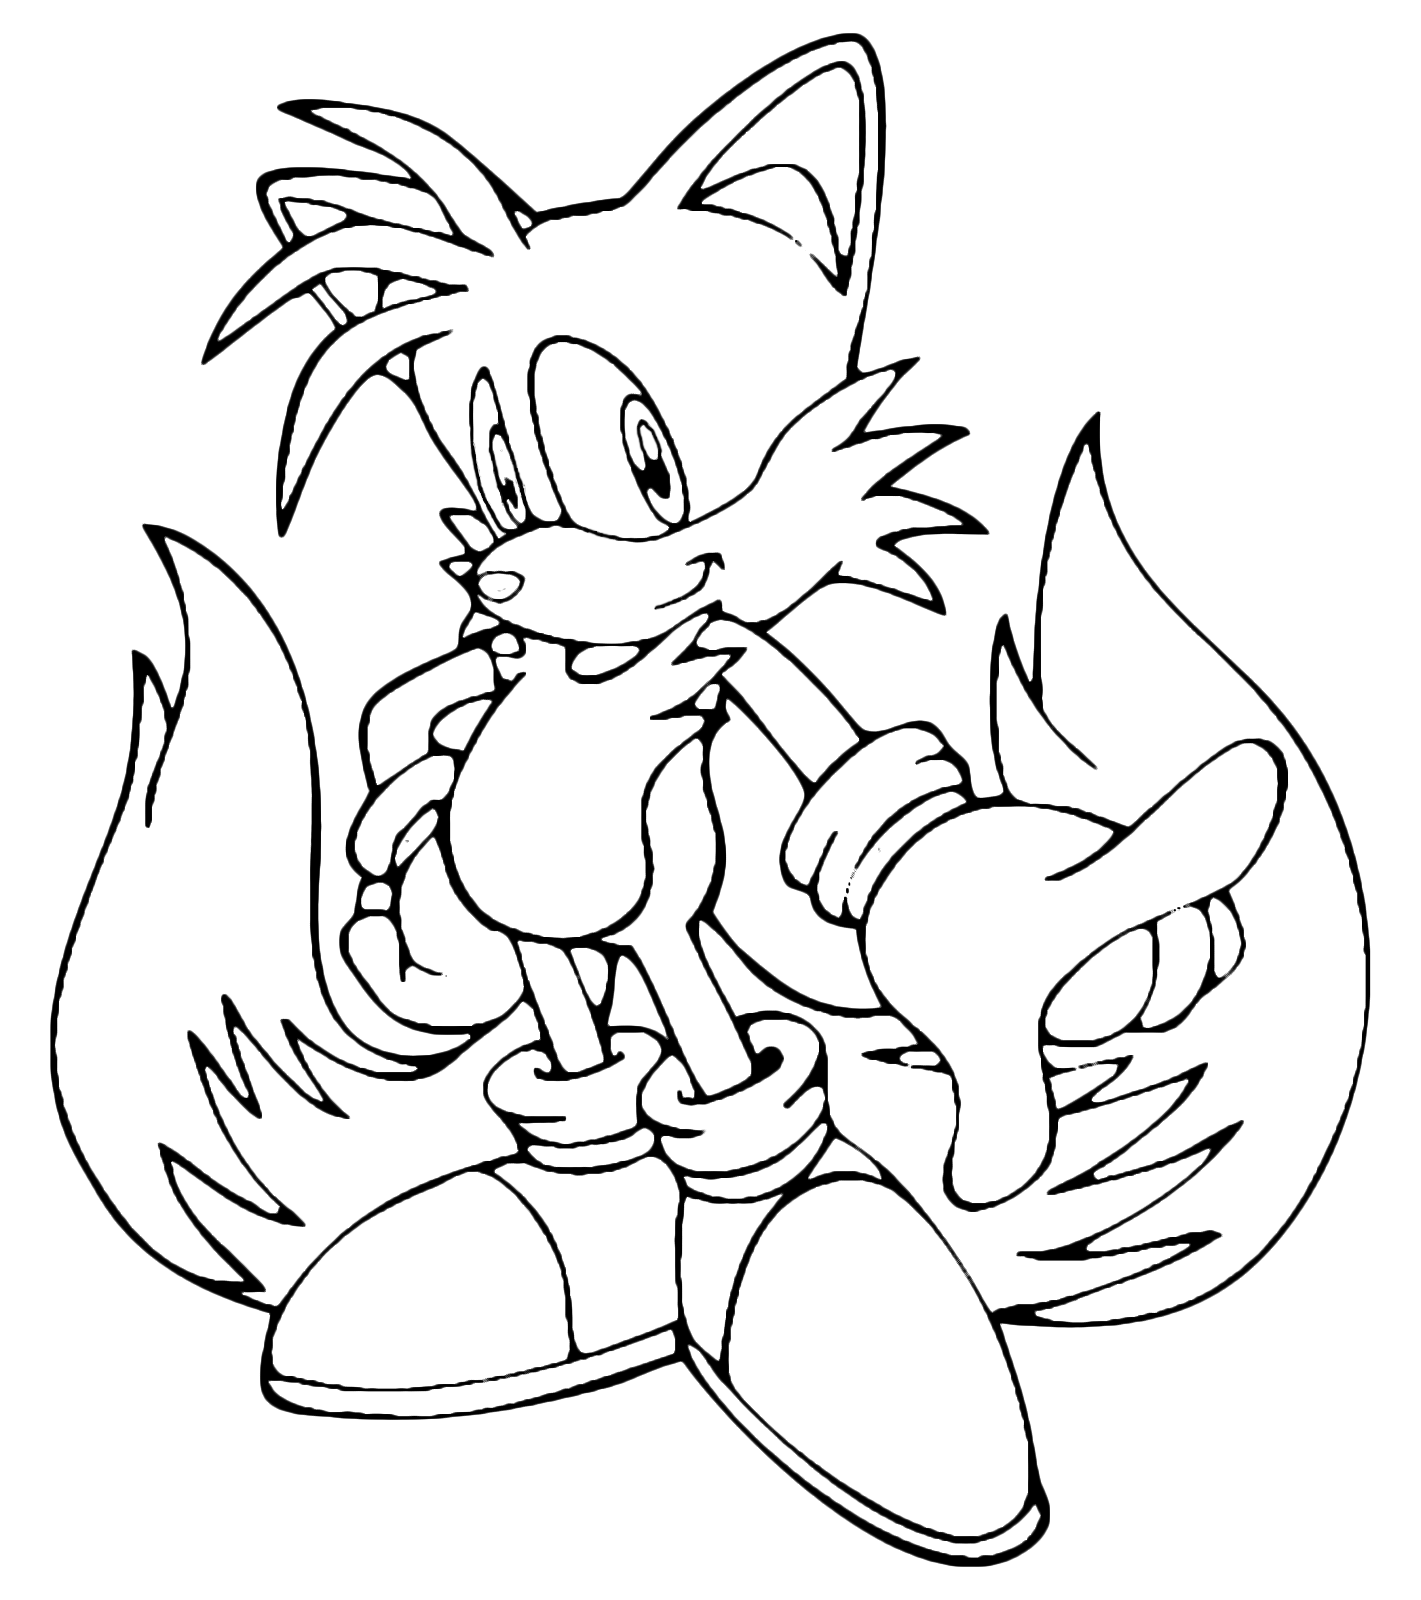 Sonic's friend Knuckles - Sonic the Hedgehog Kids Coloring Pages